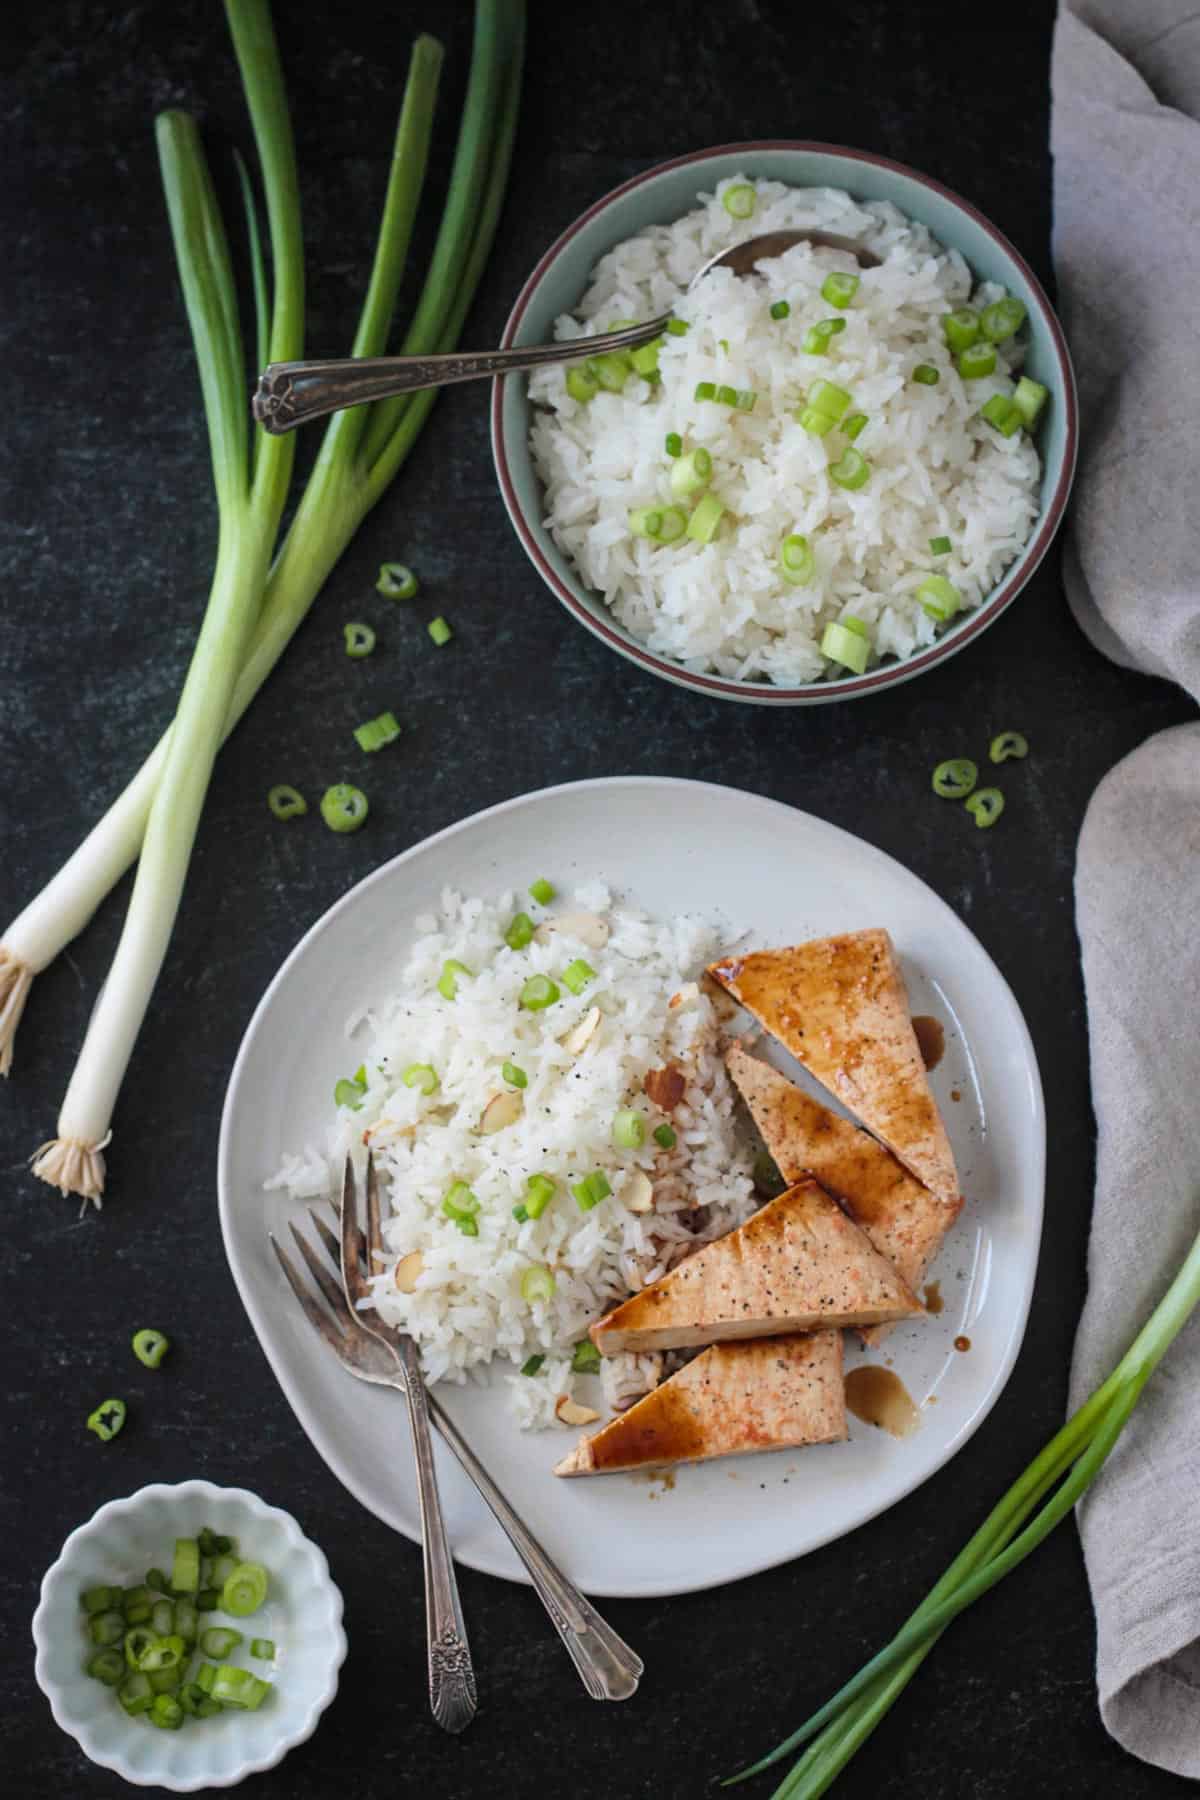 Serving of coconut jasmine rice and baked tofu on a plate next to a bowl of rice and loose green onions.